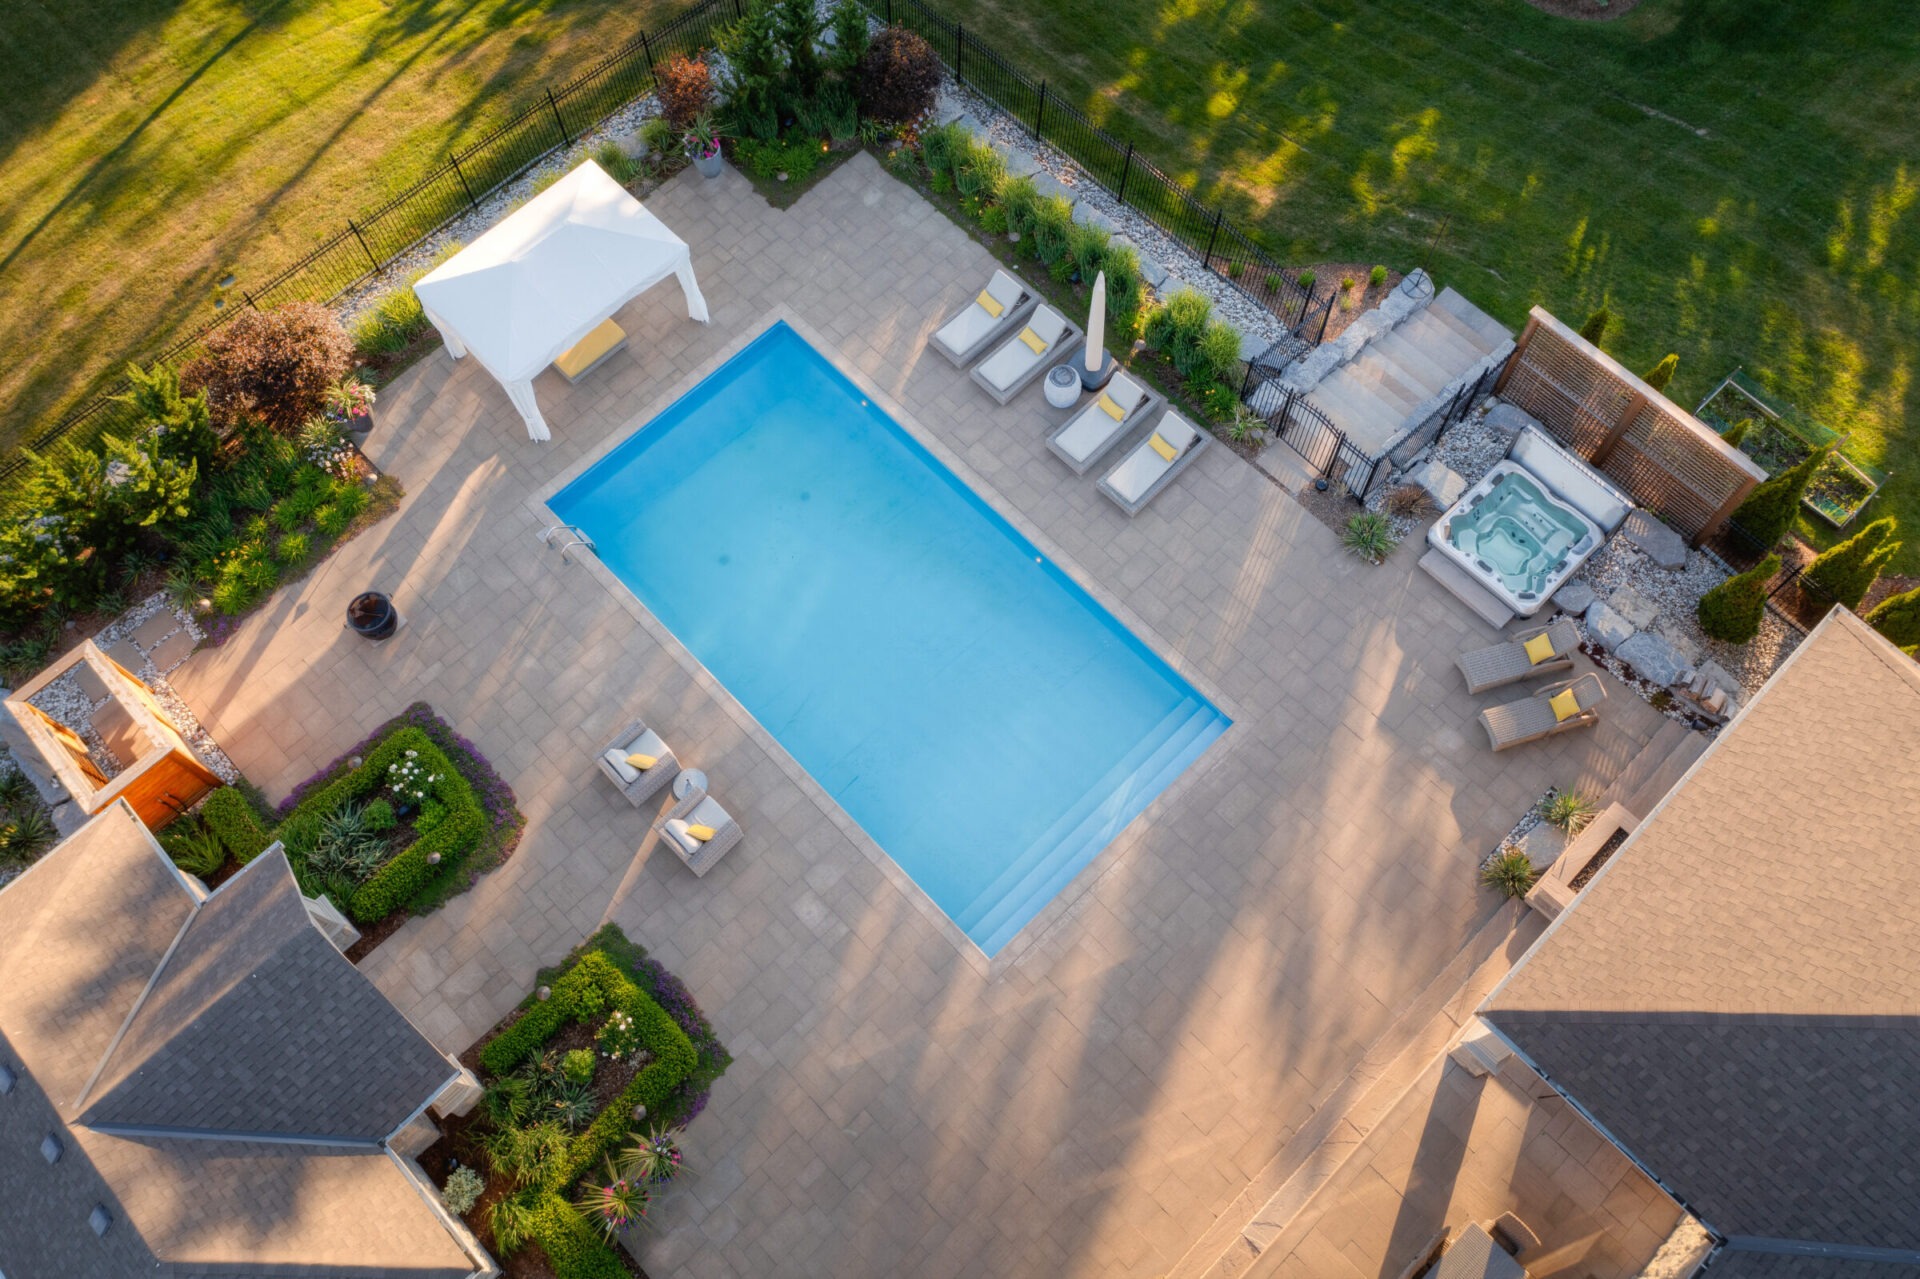 Aerial view of a residential backyard with a rectangular swimming pool, hot tub, lounge chairs, gazebo, manicured lawn, and fenced perimeter at dusk.